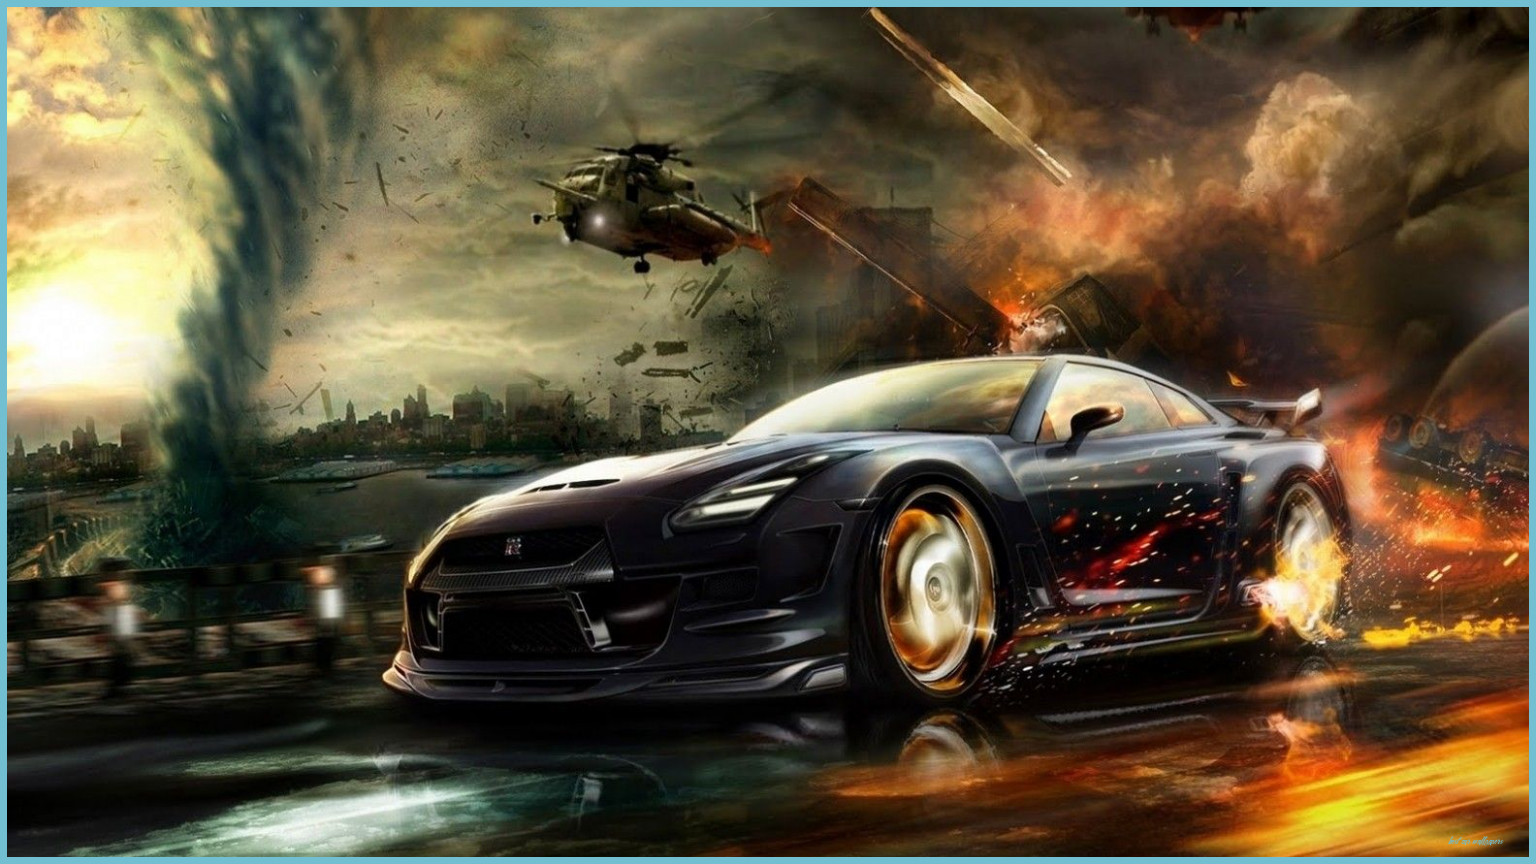 Is Best Car Wallpaper Any Good? 10 Ways You Can Be Certain. Best Car Wallpaper